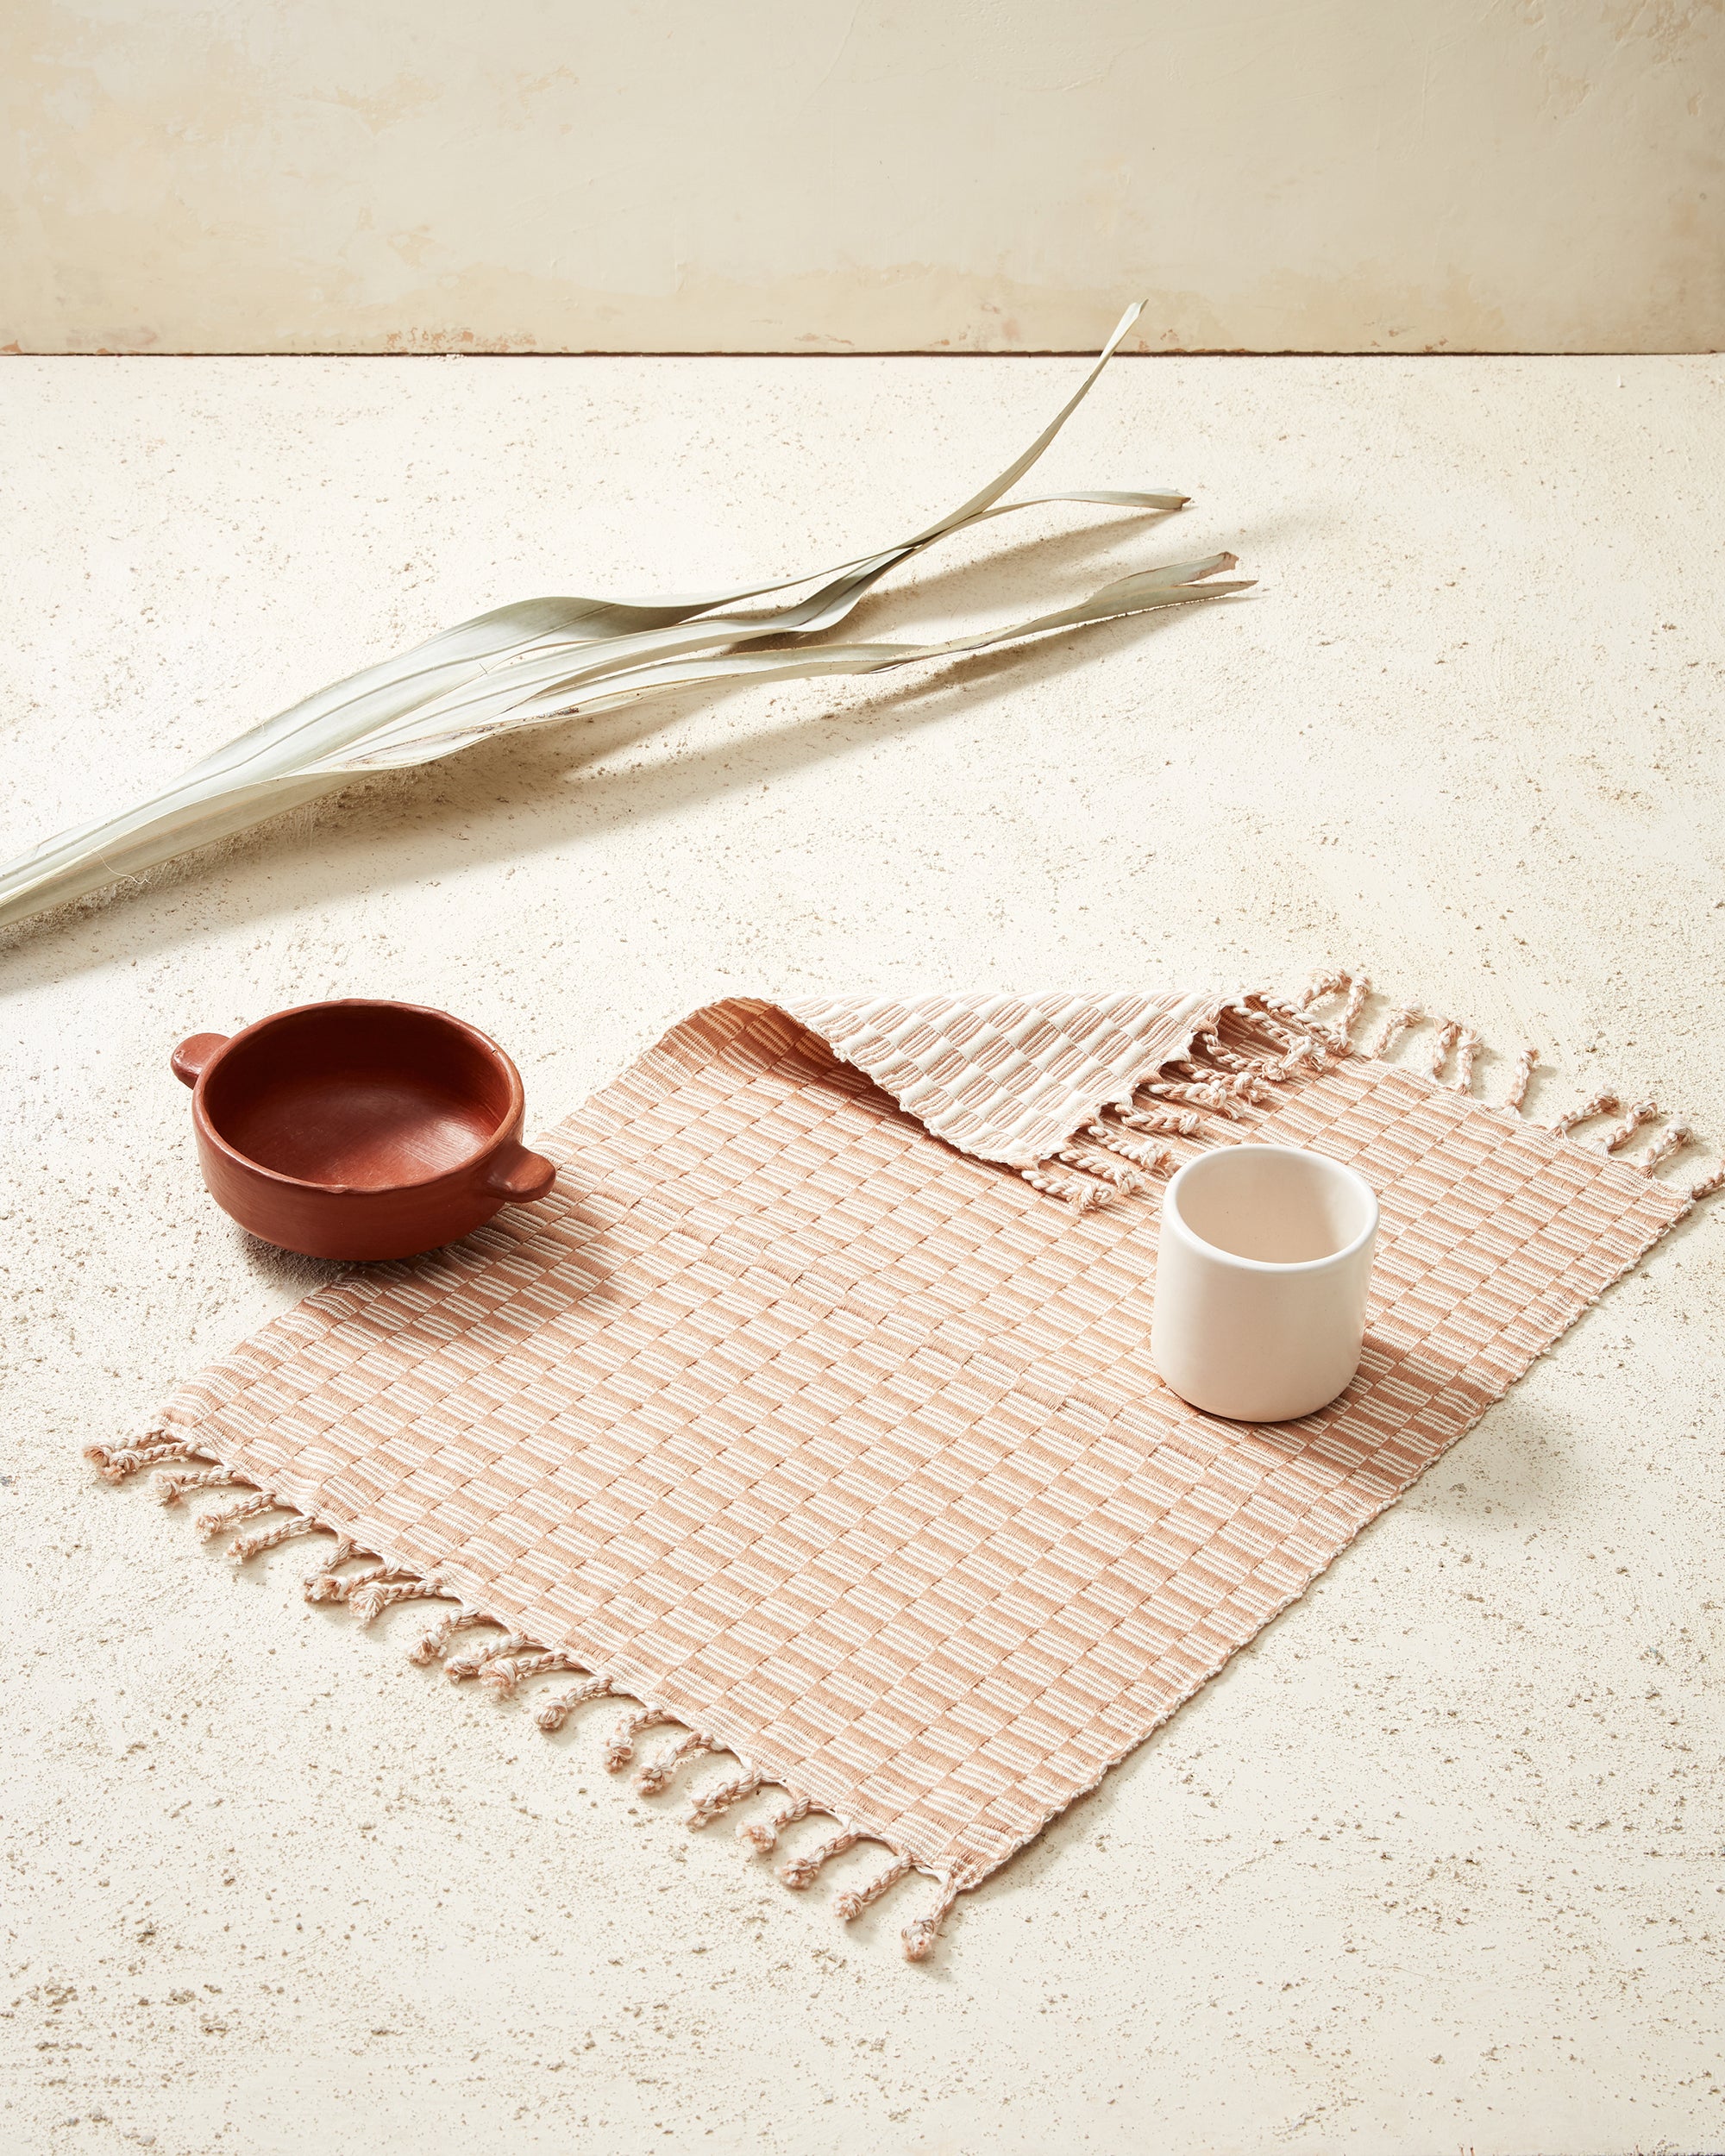 https://cdn.shopify.com/s/files/1/0918/1474/products/Placemat_Panalitio_Peach_styled_2000x.jpg?v=1537462354